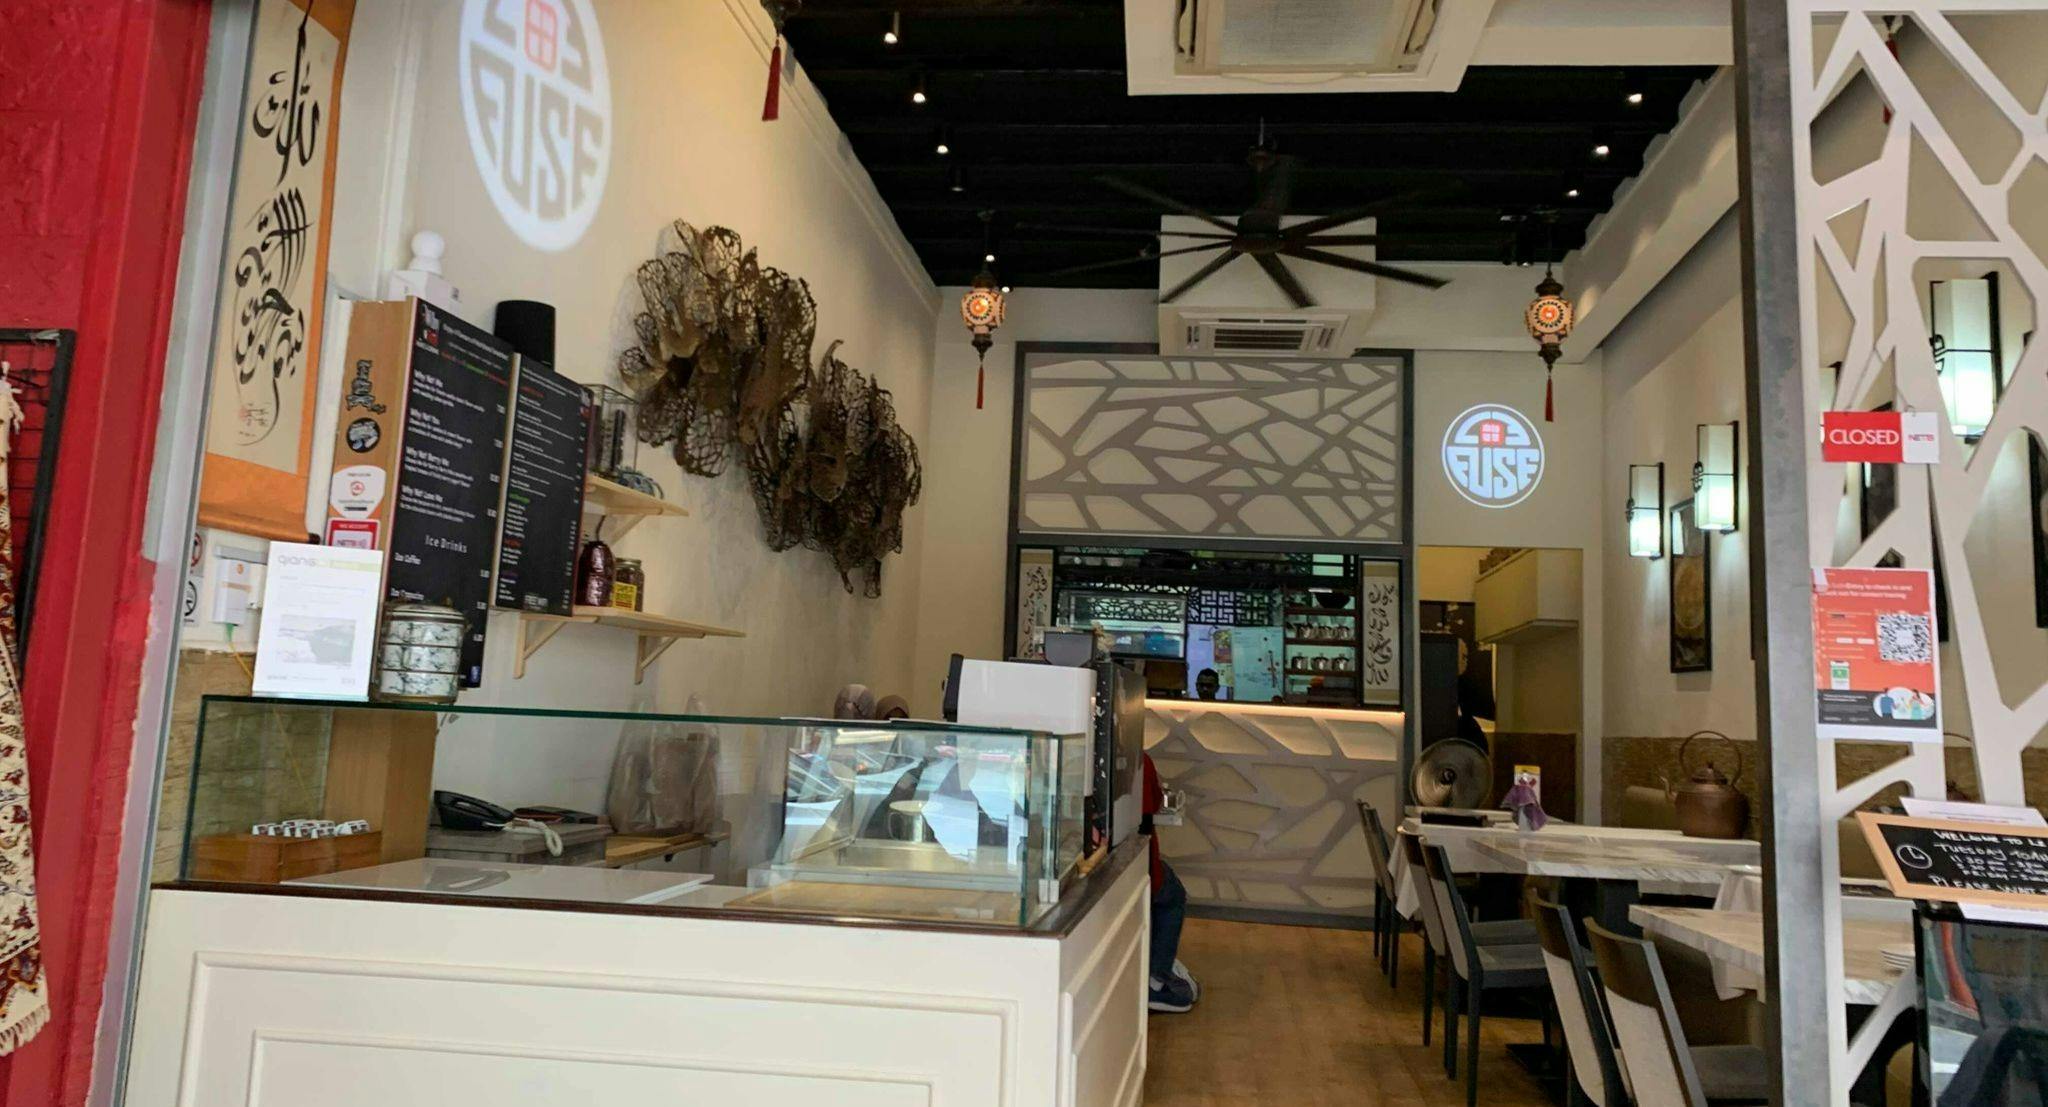 Photo of restaurant Le Fuse Cafe in Kallang, Singapore